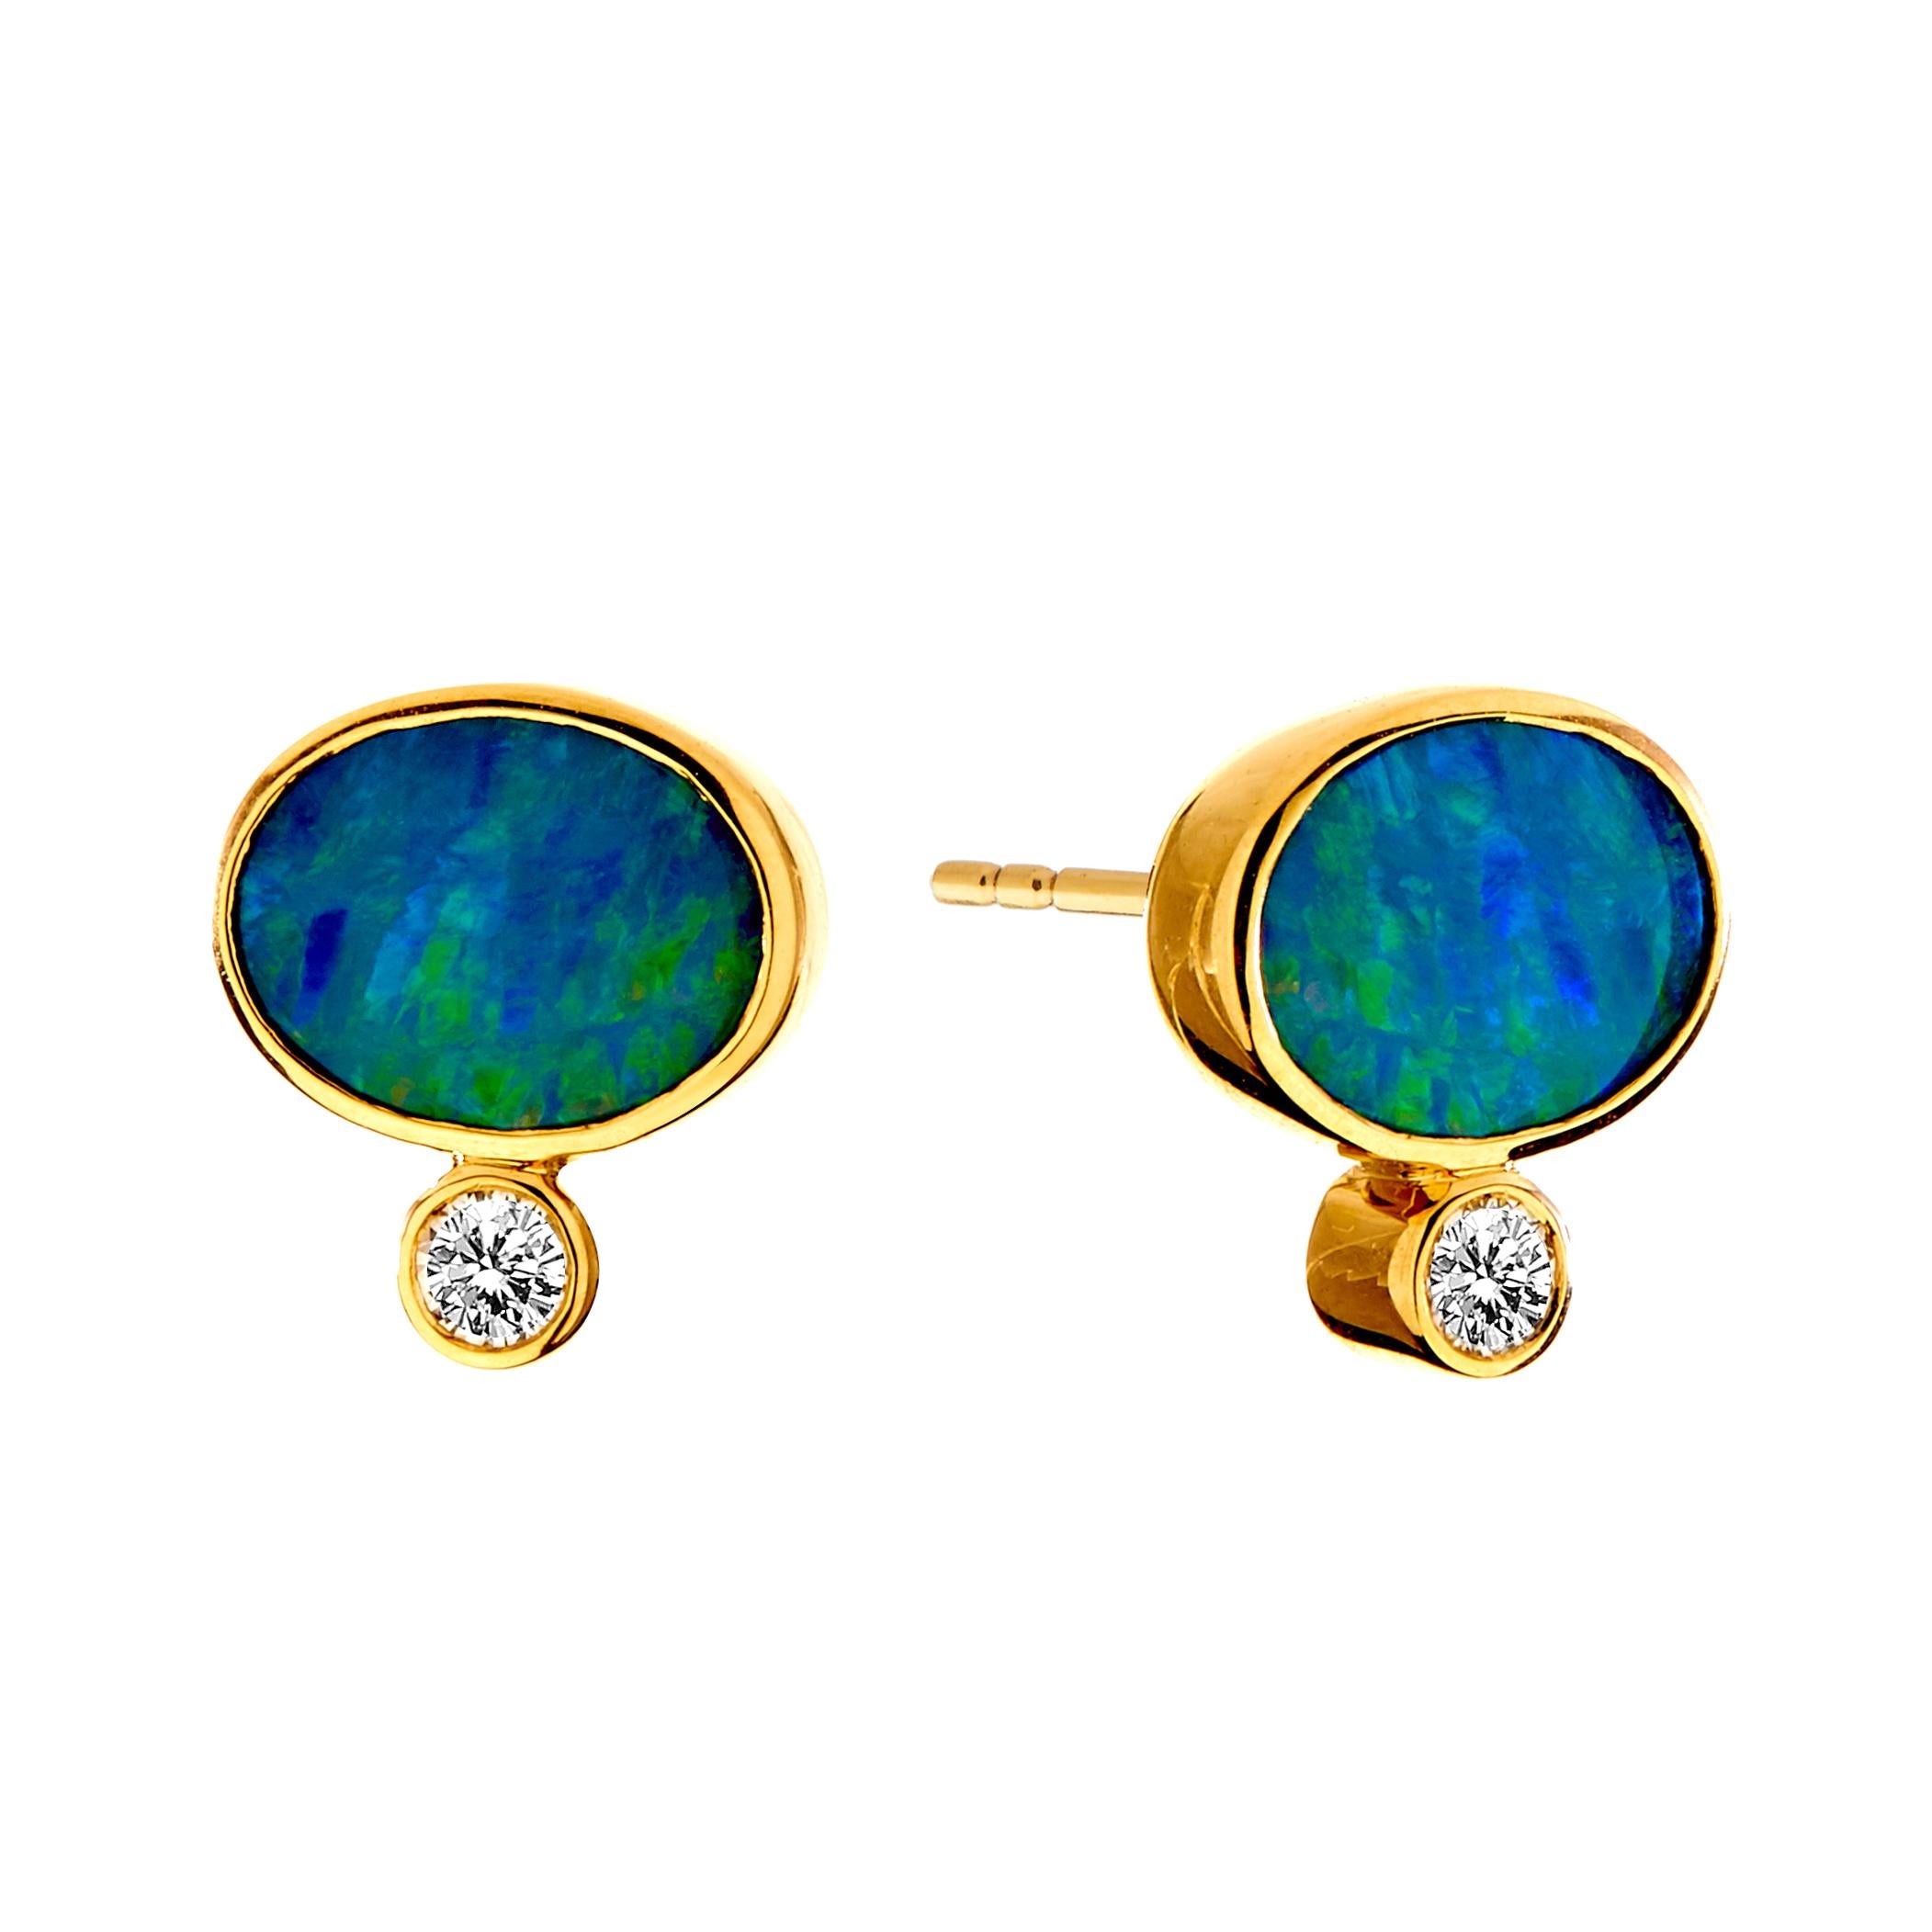 Created in 18k yellow gold
Australian opals 1.7 cts approx
Champagne diamonds 0.10 ct approx

About the Designers

Drawing inspiration from little things, Dharmesh & Namrata Kothari have created an extraordinary and refreshing collection of